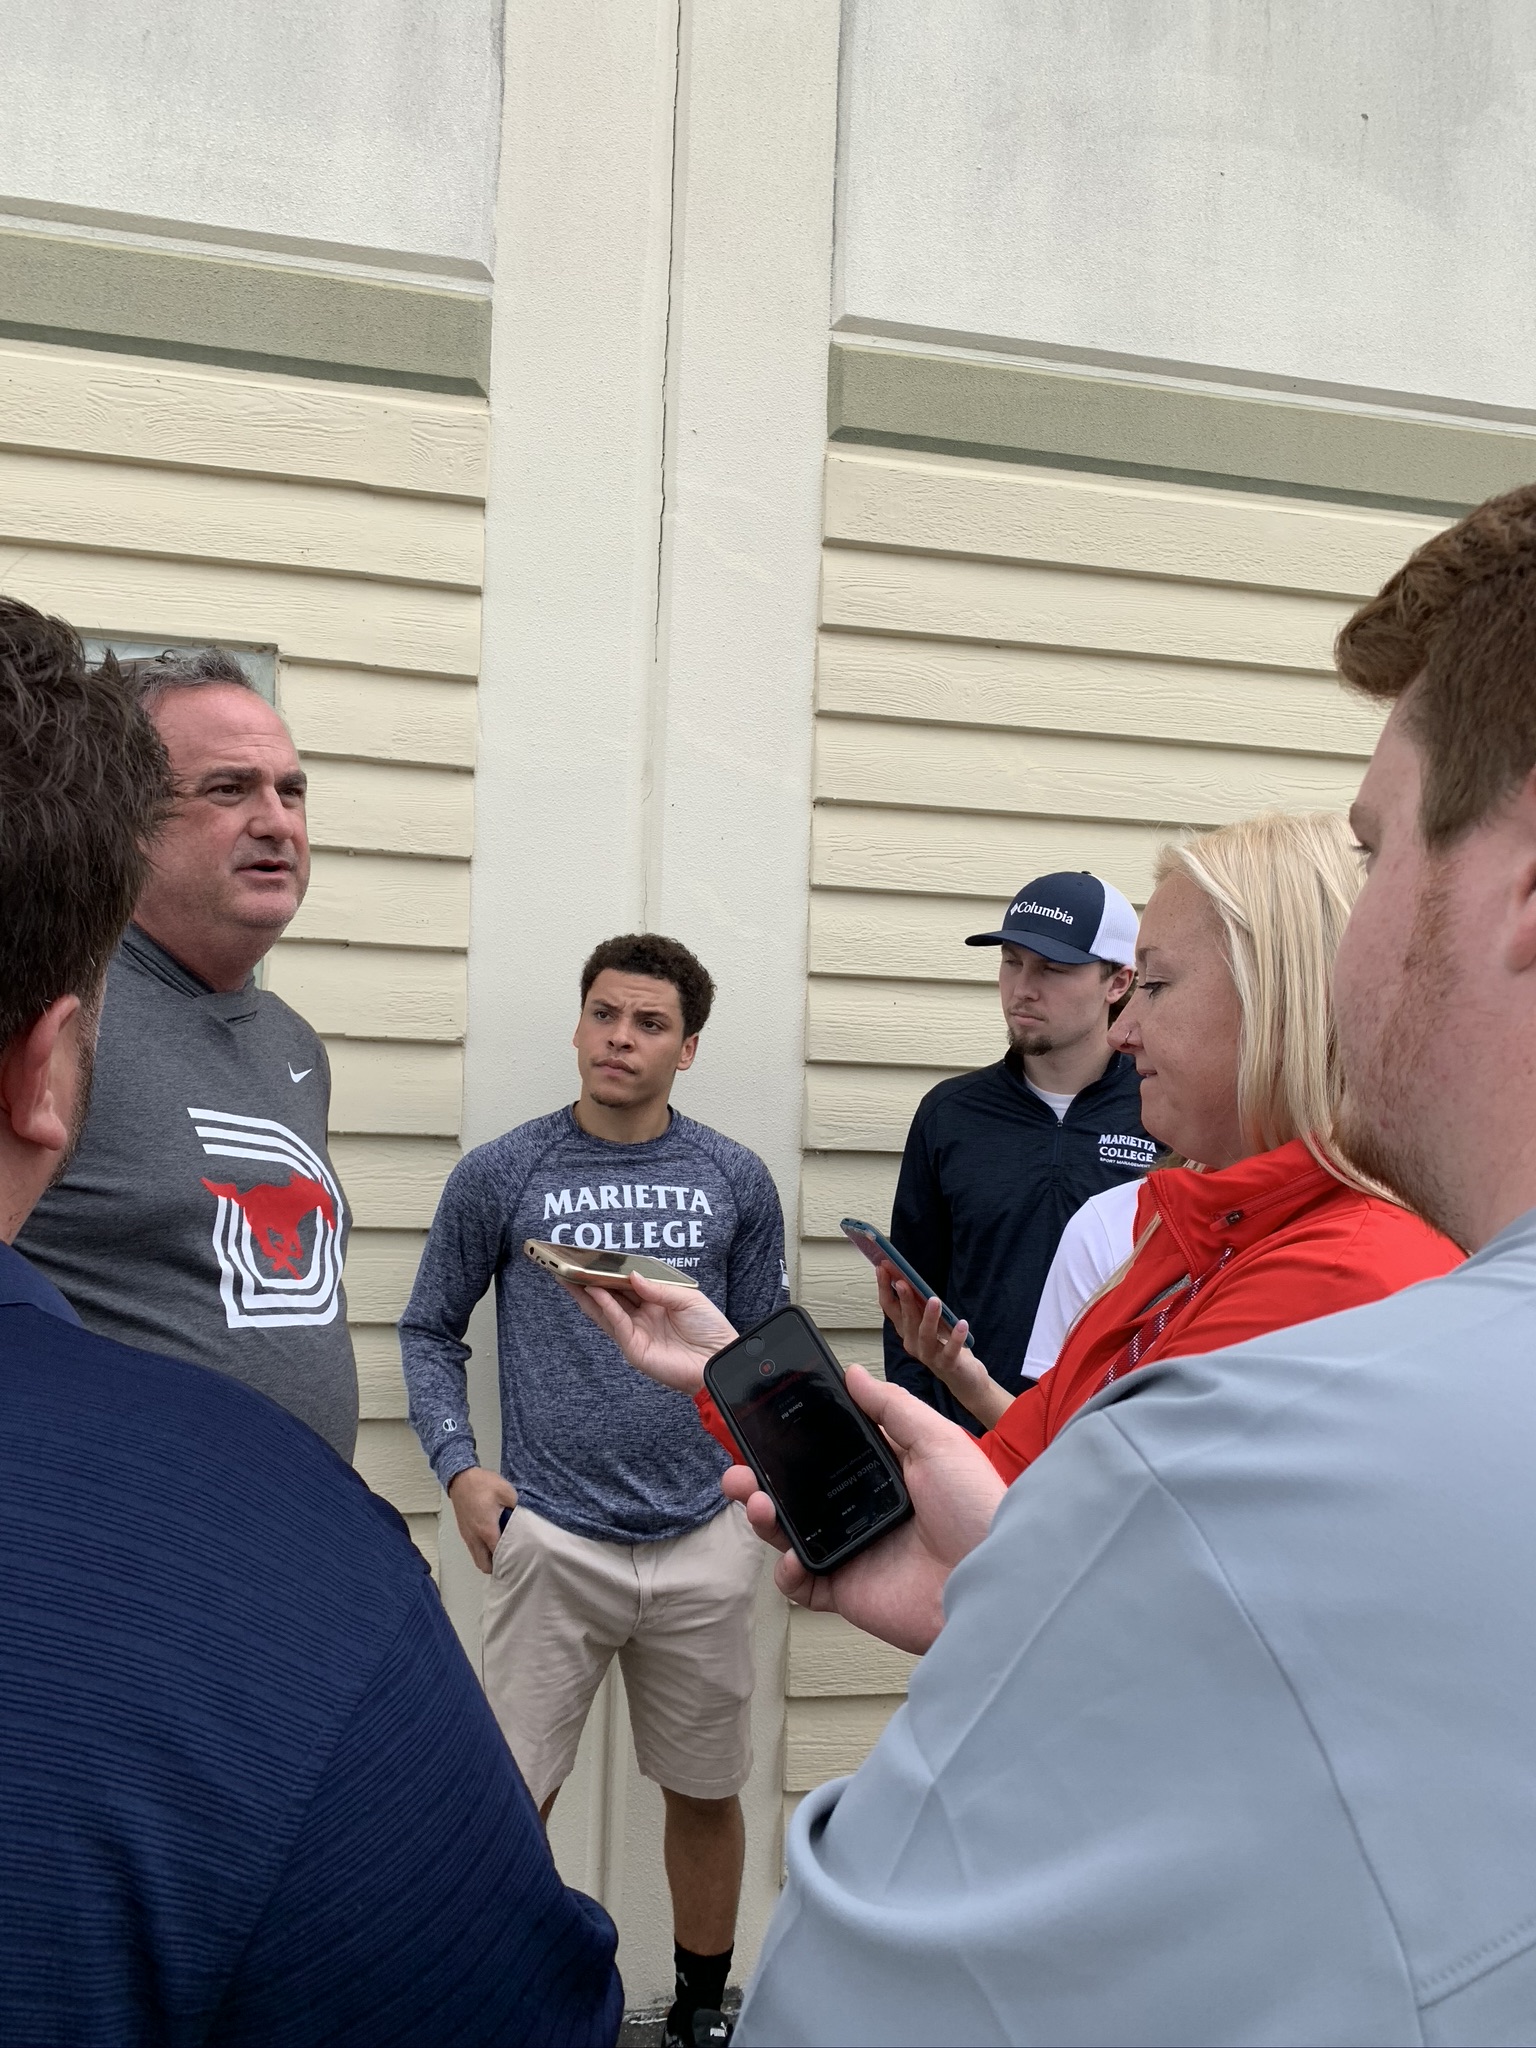 Marietta College students handling the post-practice press conference with then SMU Head Coach Sony Dykes at the Boca Raton Bowl